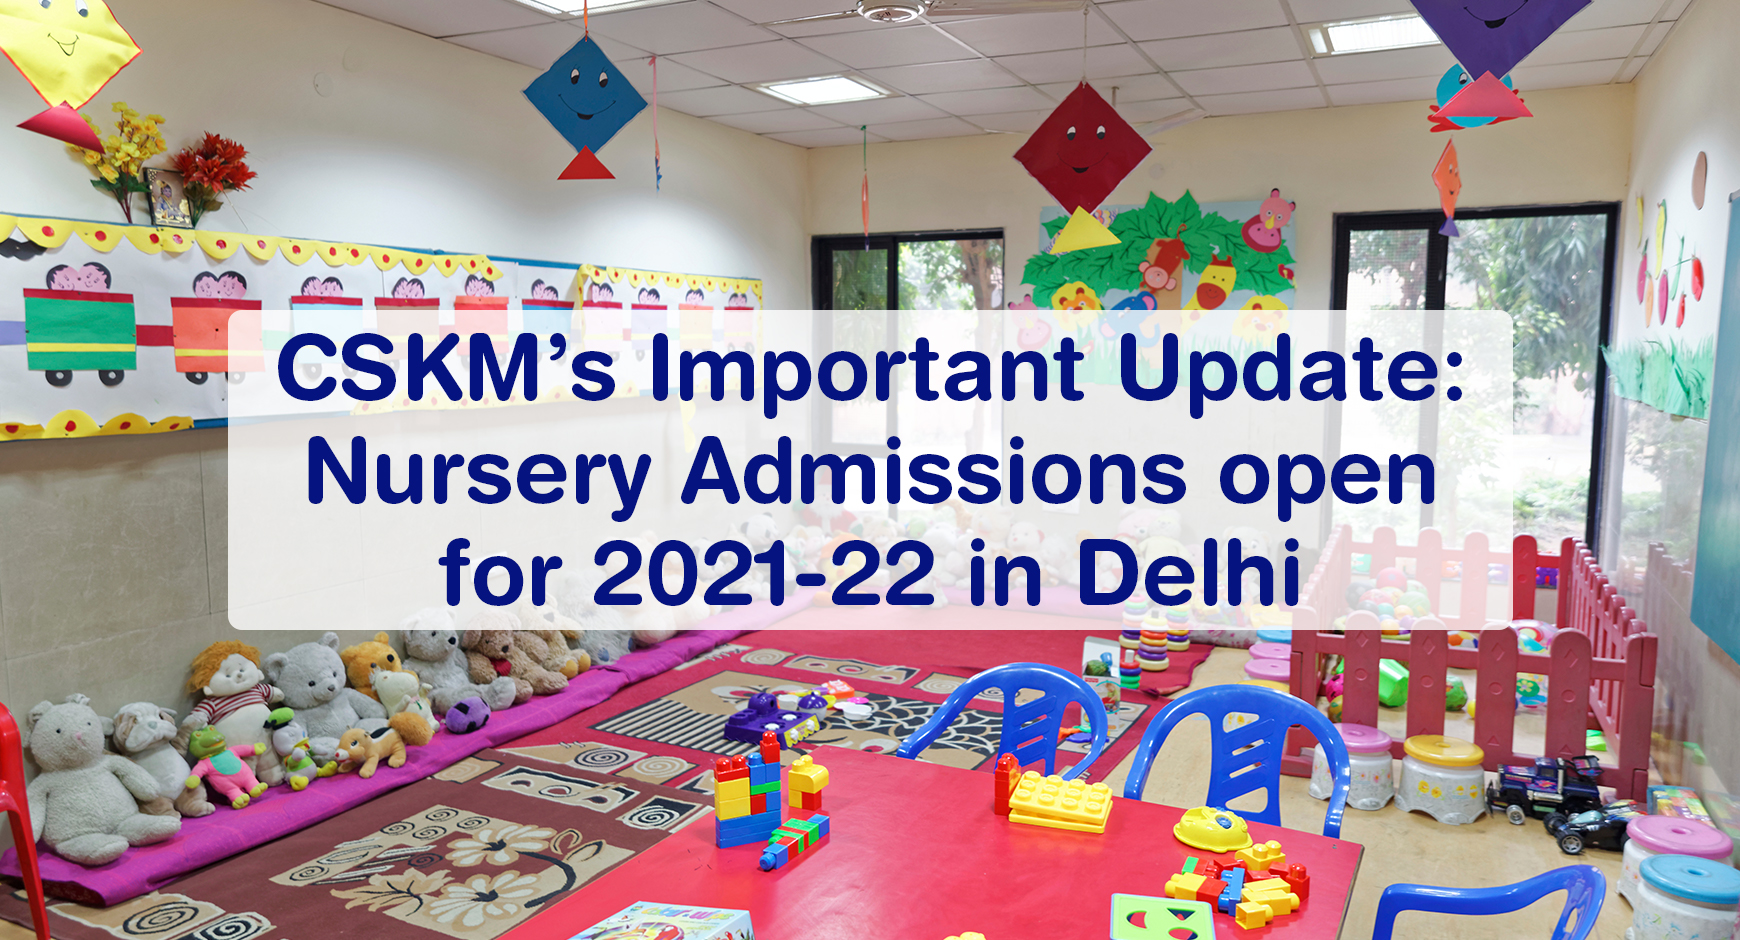 CSKM’s Important Update: Nursery Admissions open for 2021-22 in Delhi